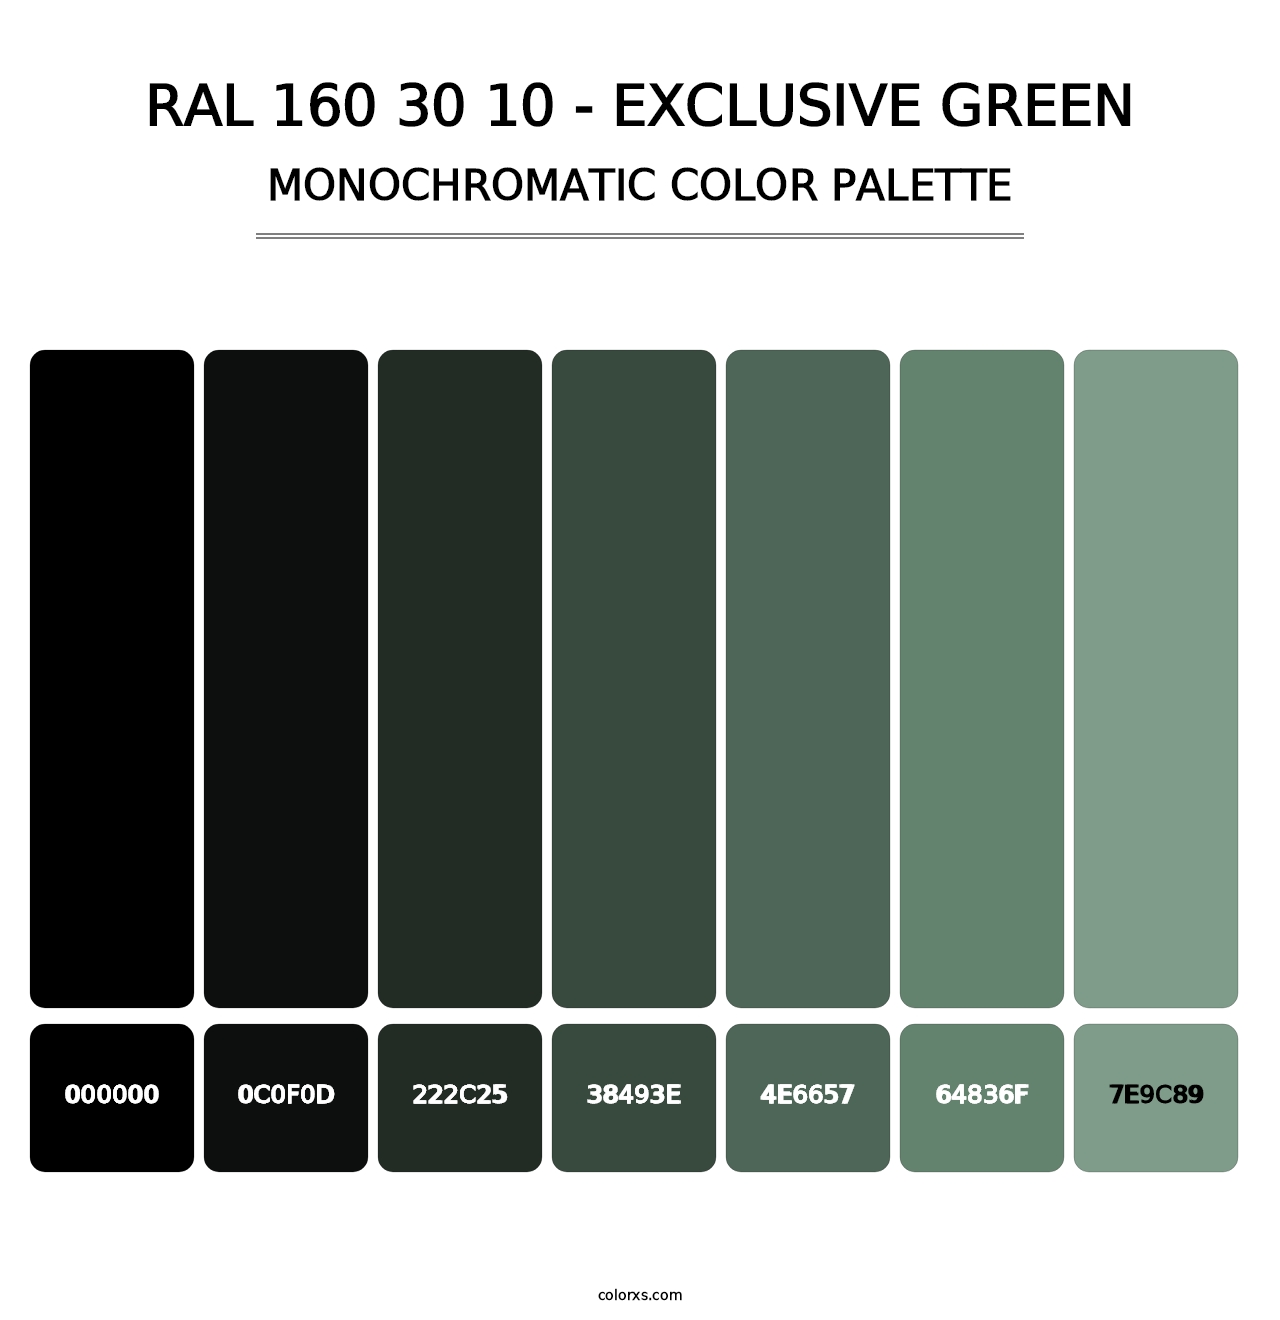 RAL 160 30 10 - Exclusive Green - Monochromatic Color Palette